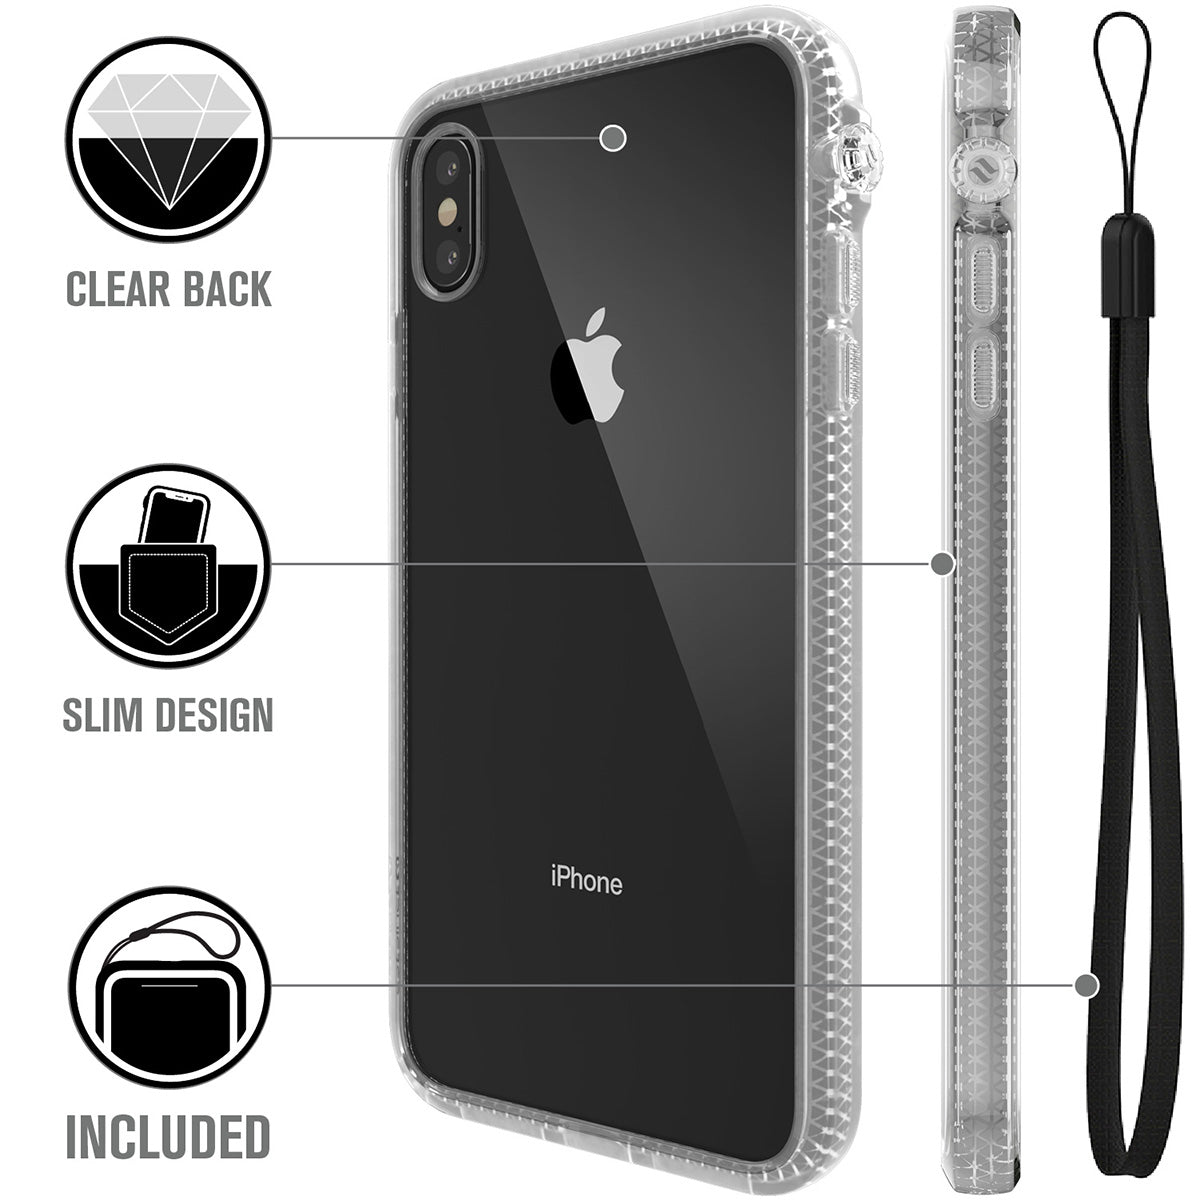 Catalyst Impact Protection Case for iPhone X/XR/Xs/Xs Max showing the back and side of the case with lanyard text reads clear back slim design lanyard included